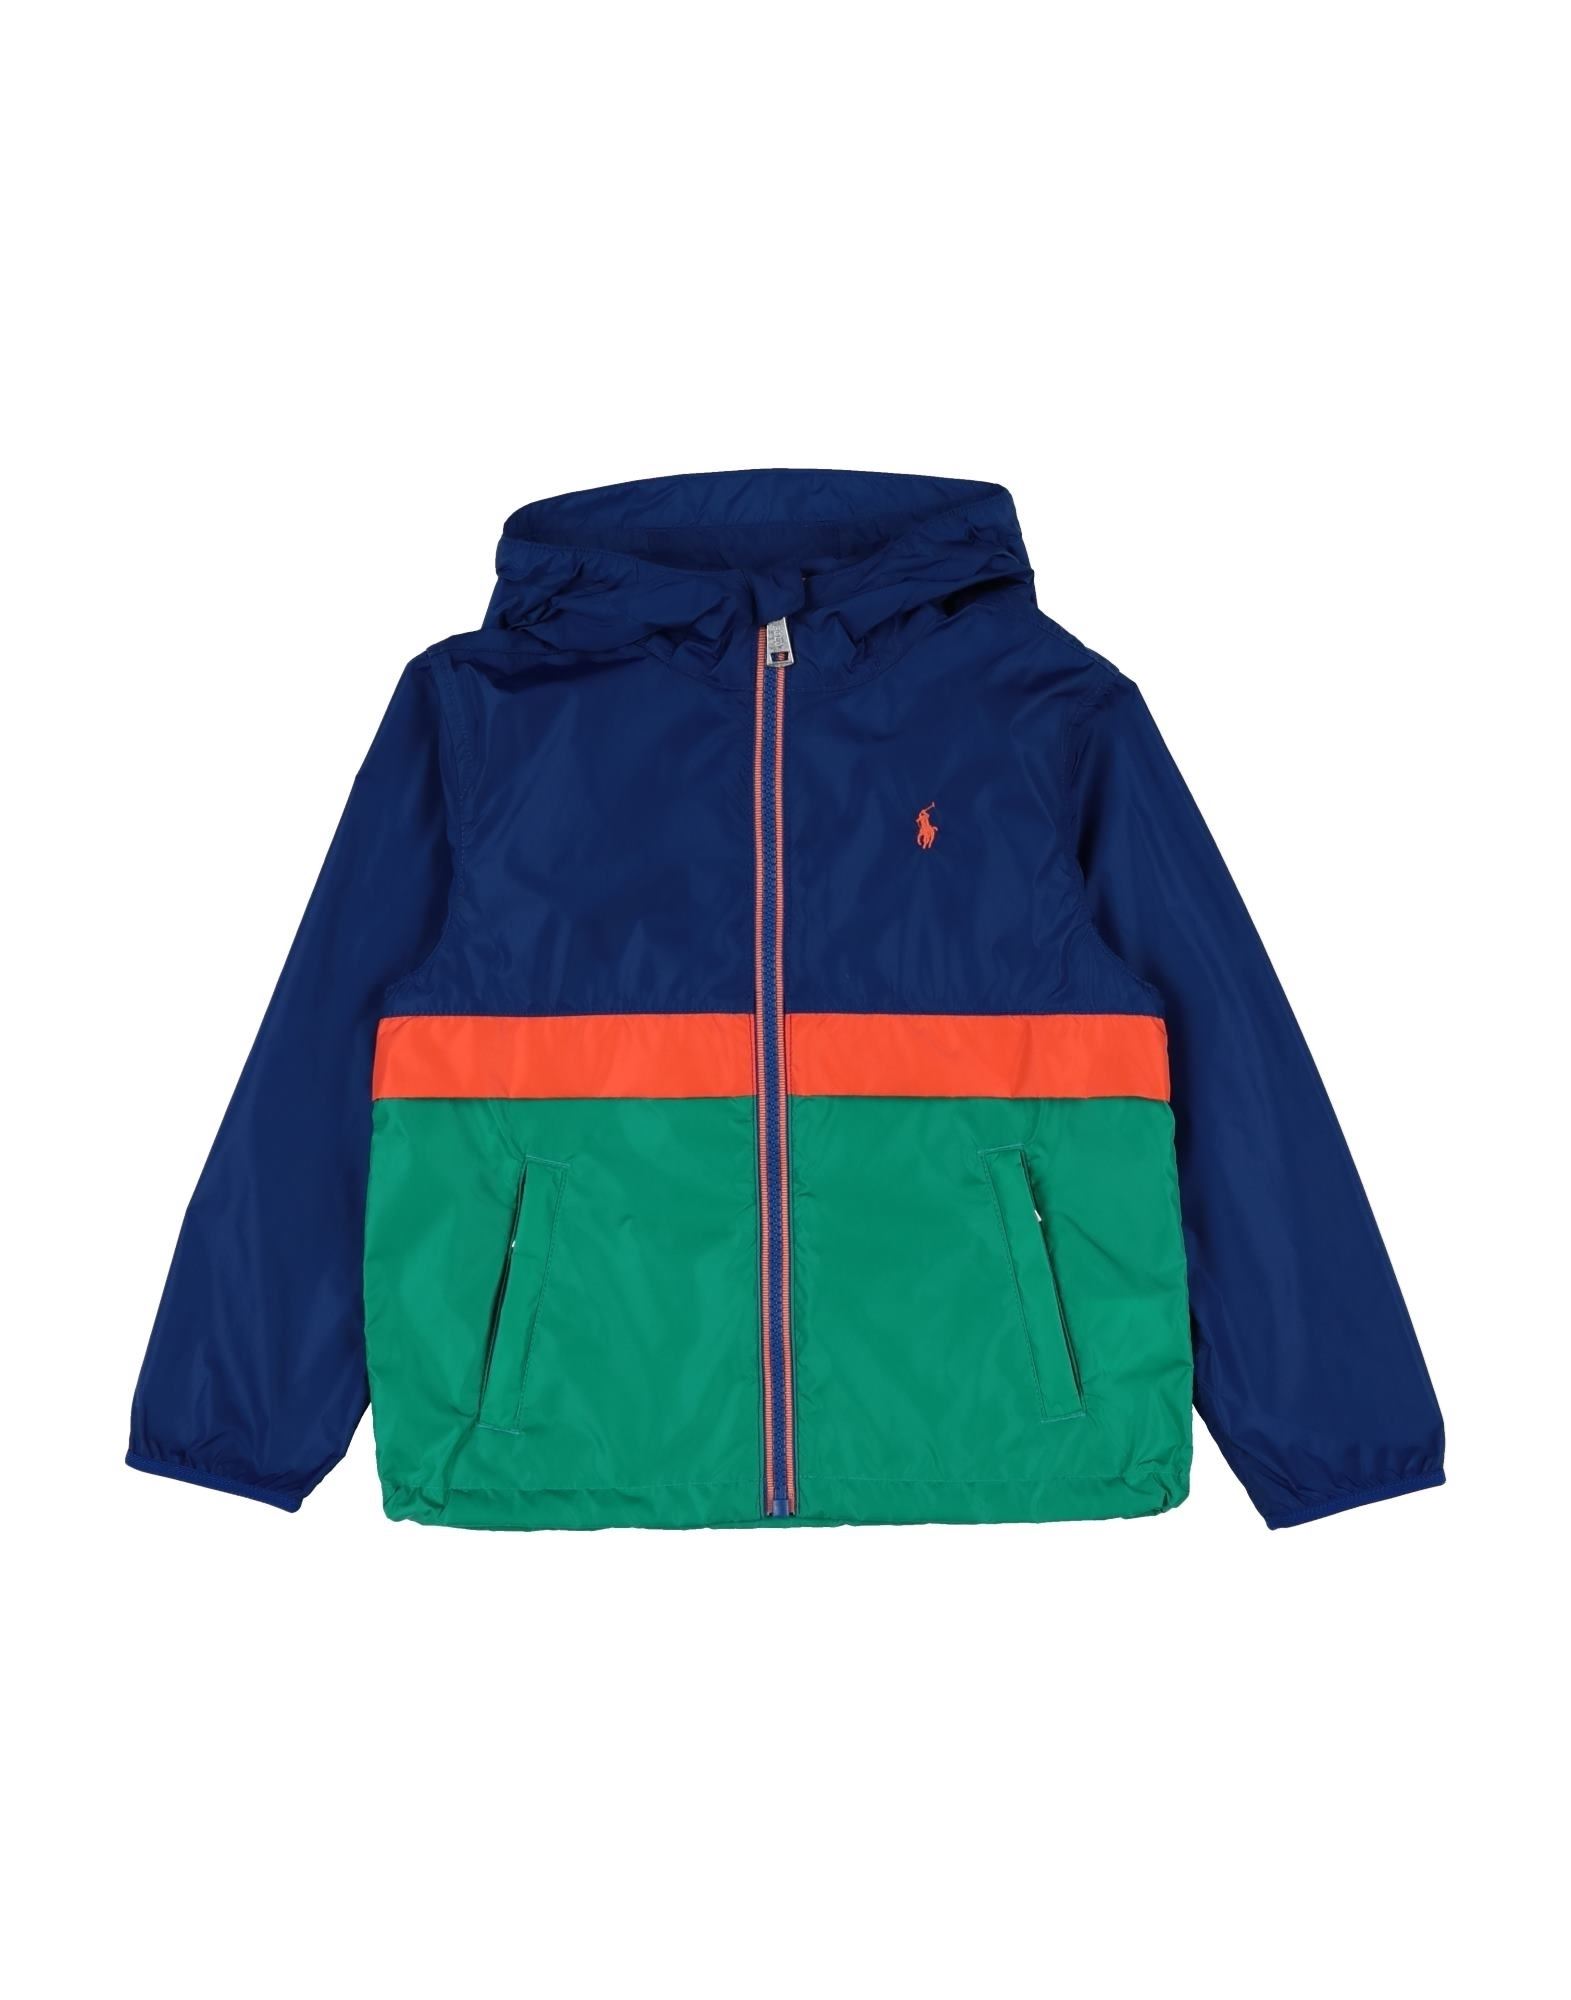 ＜YOOX＞ ★19%OFF！RALPH LAUREN ボーイズ 3-8 歳 ブルゾン ブルー 6 ナイロン 100% Color-Blocked Hooded Jacket